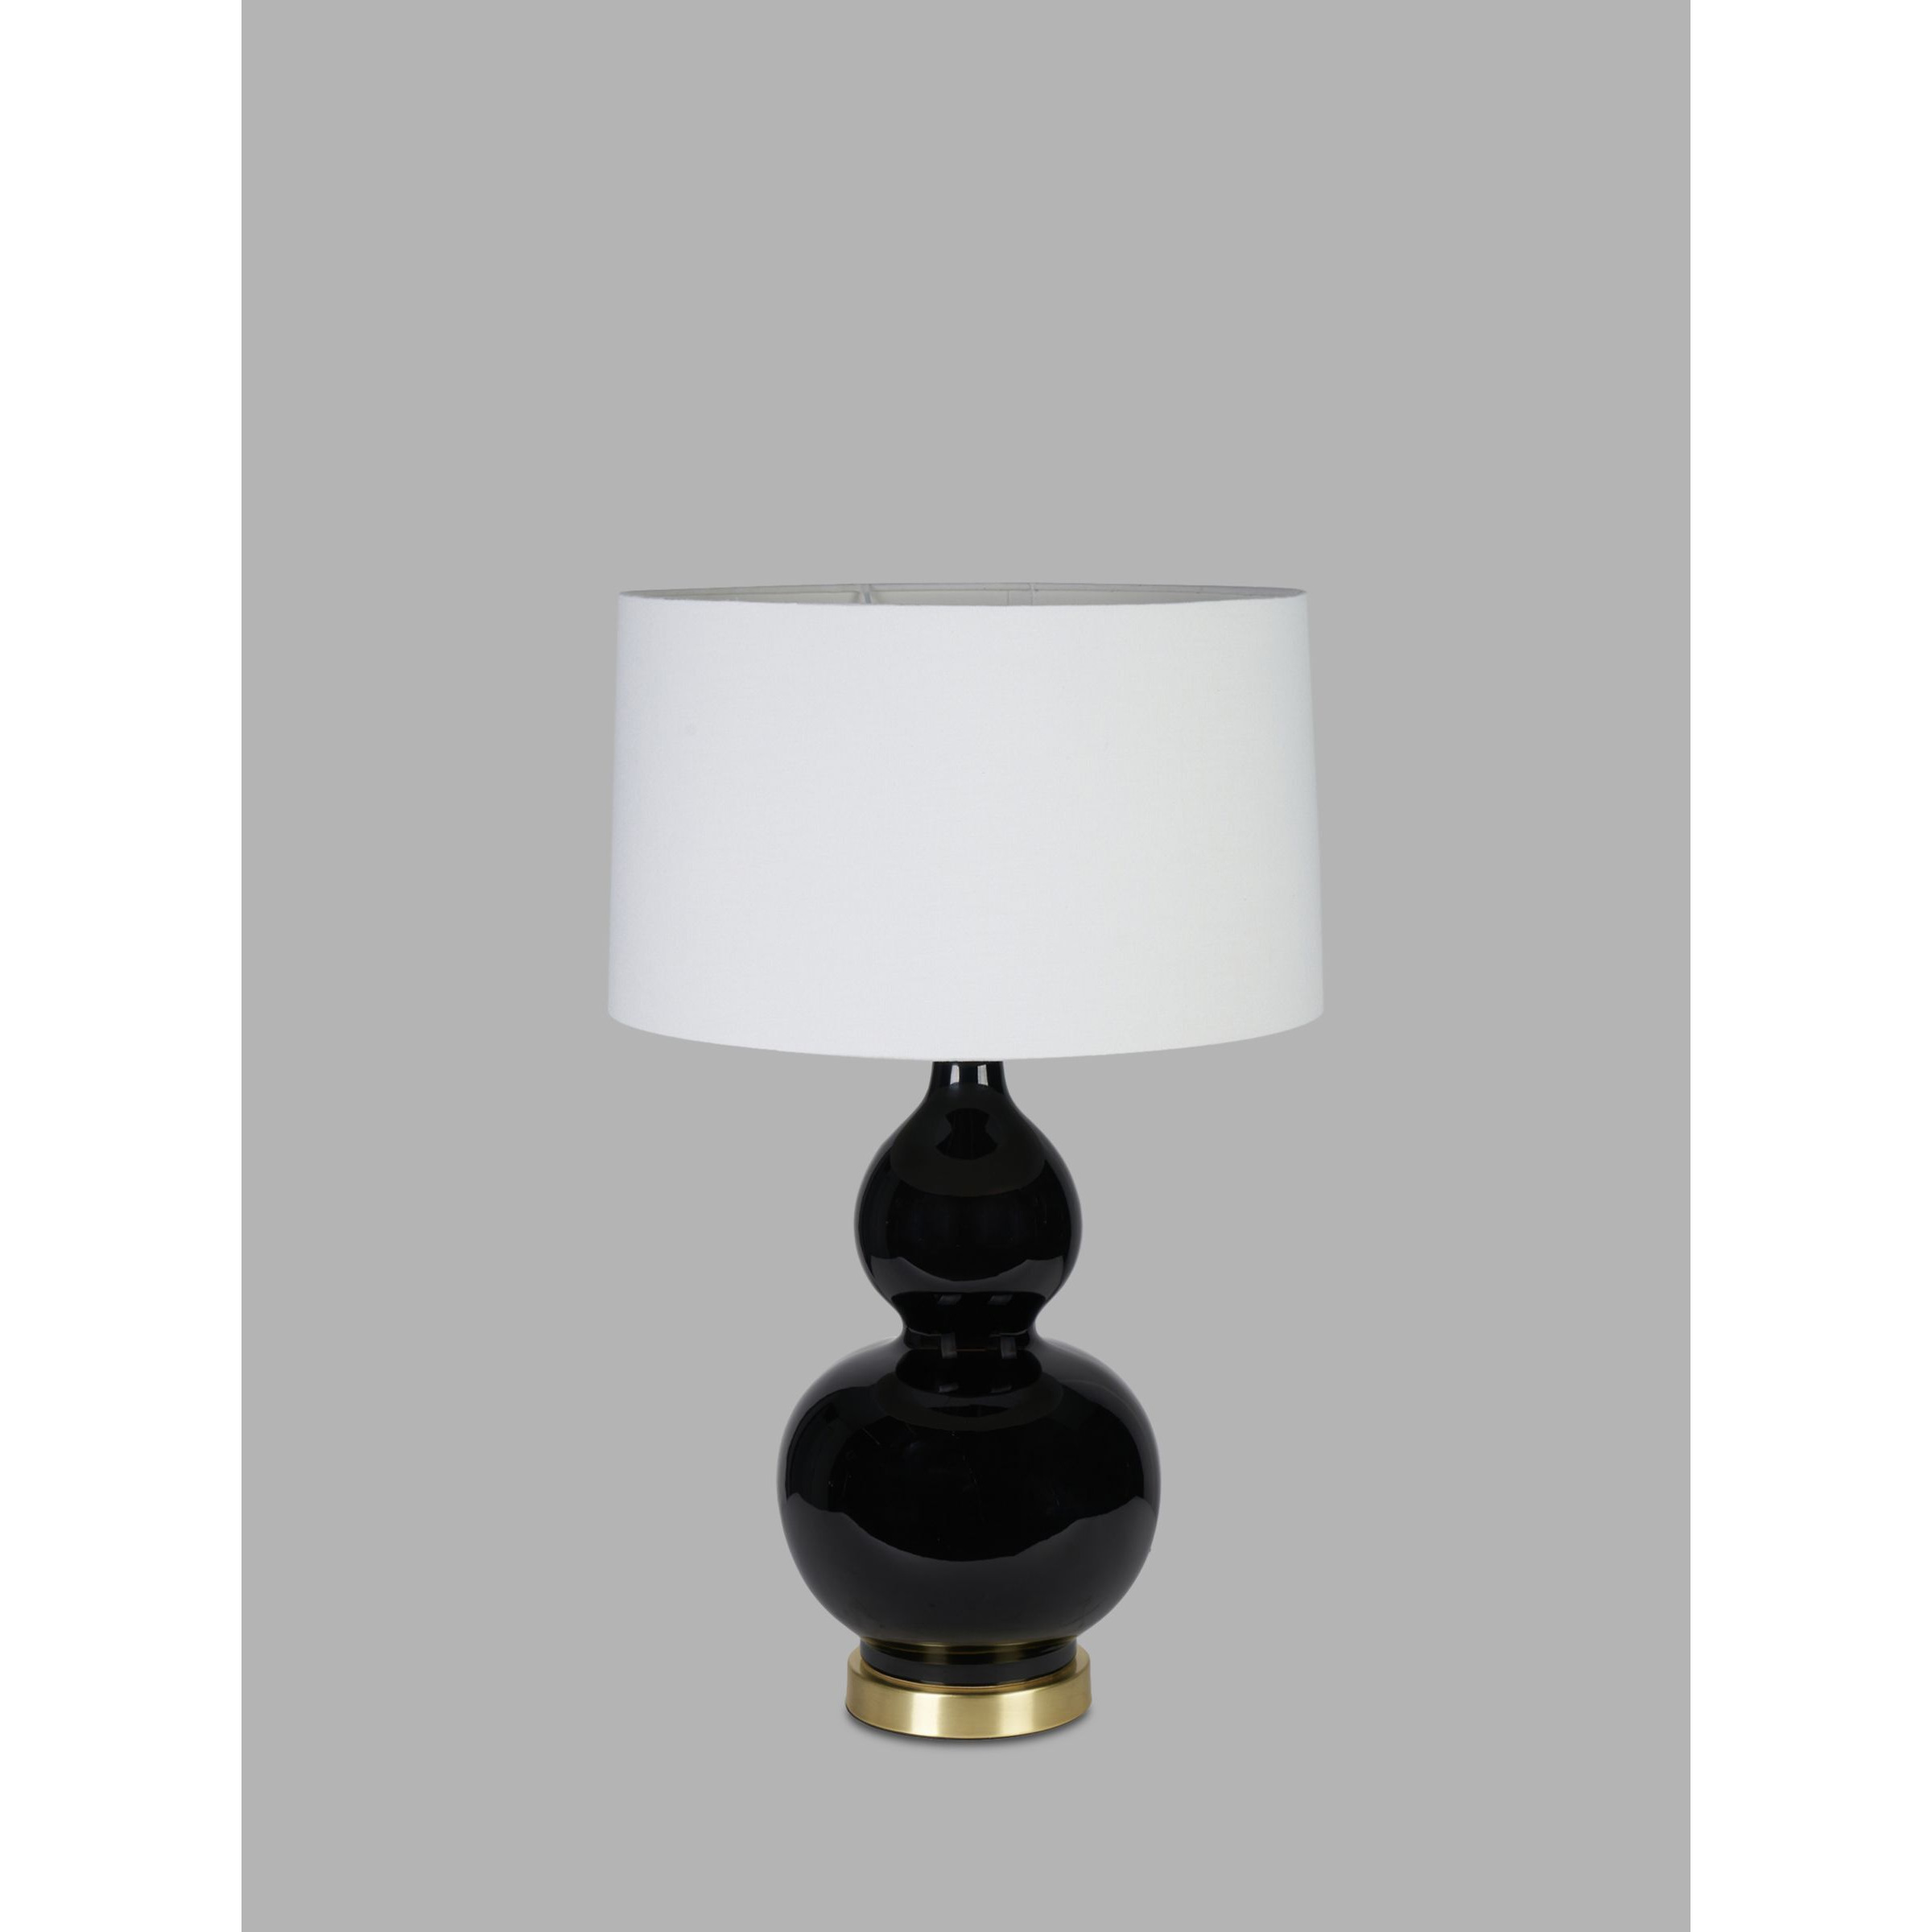 Pacific Lifestyle Gatsby Glazed Table Lamp - image 1